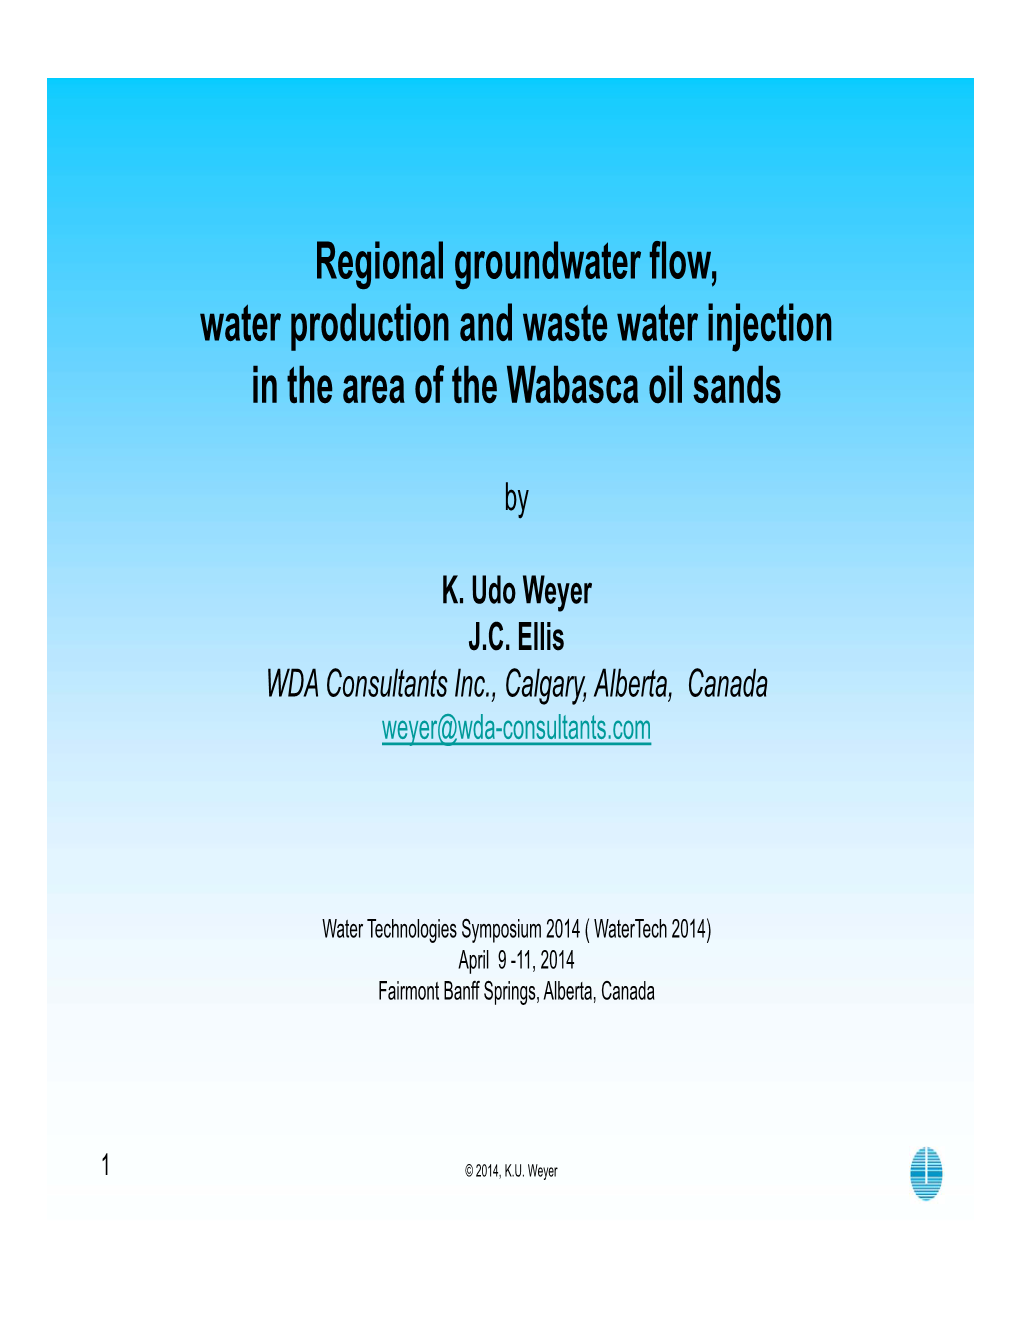 Regional Groundwater Flow, Water Production and Waste Water Injection in the Area of the Wabasca Oil Sands